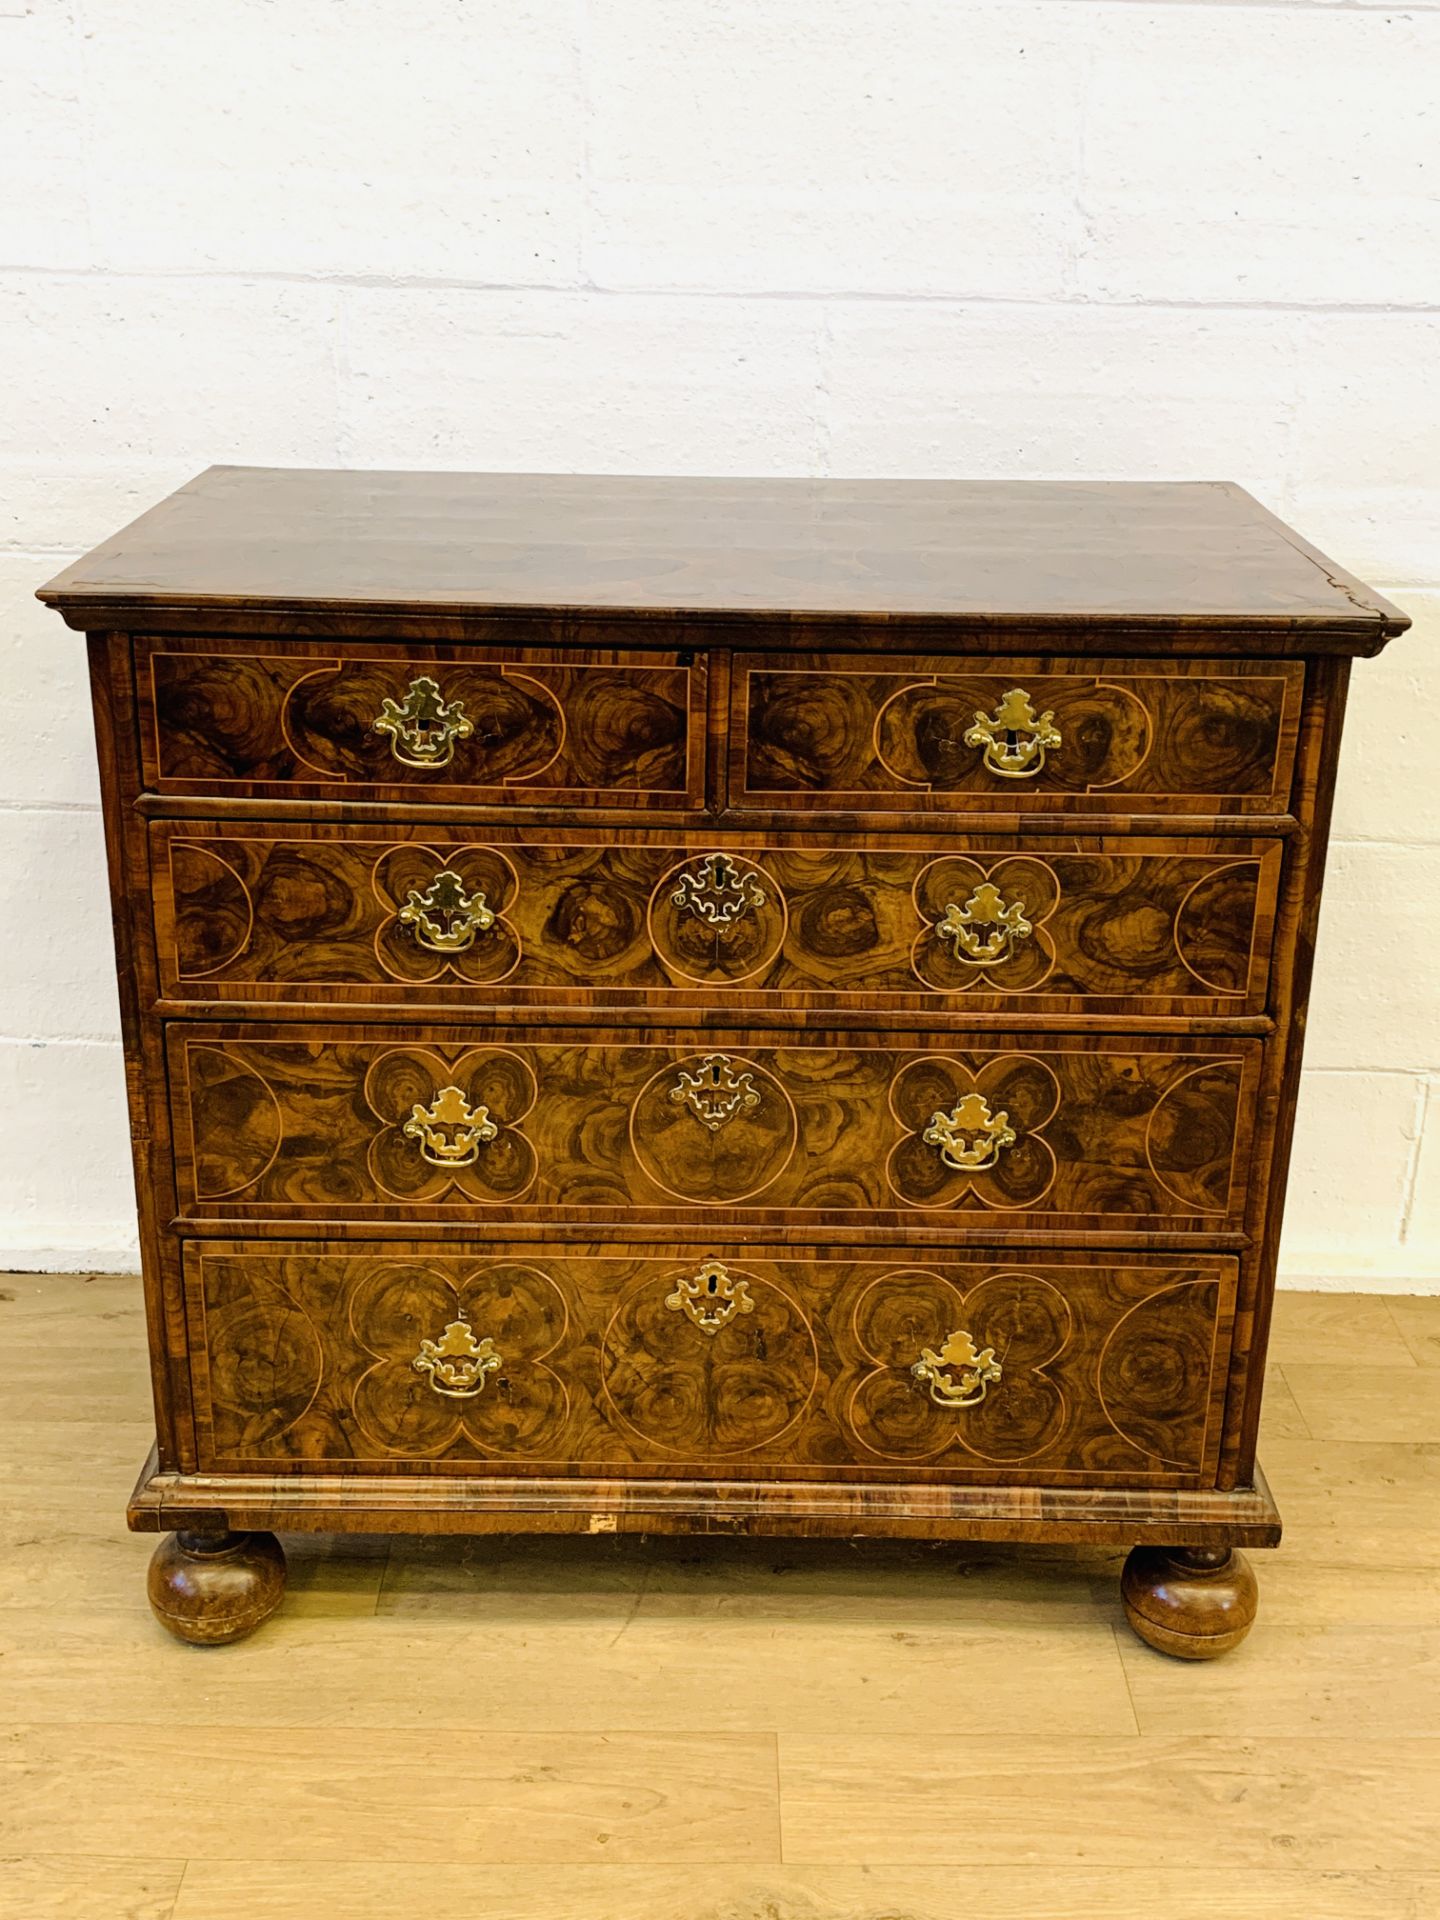 William and Mary period chest of drawers - Image 8 of 11